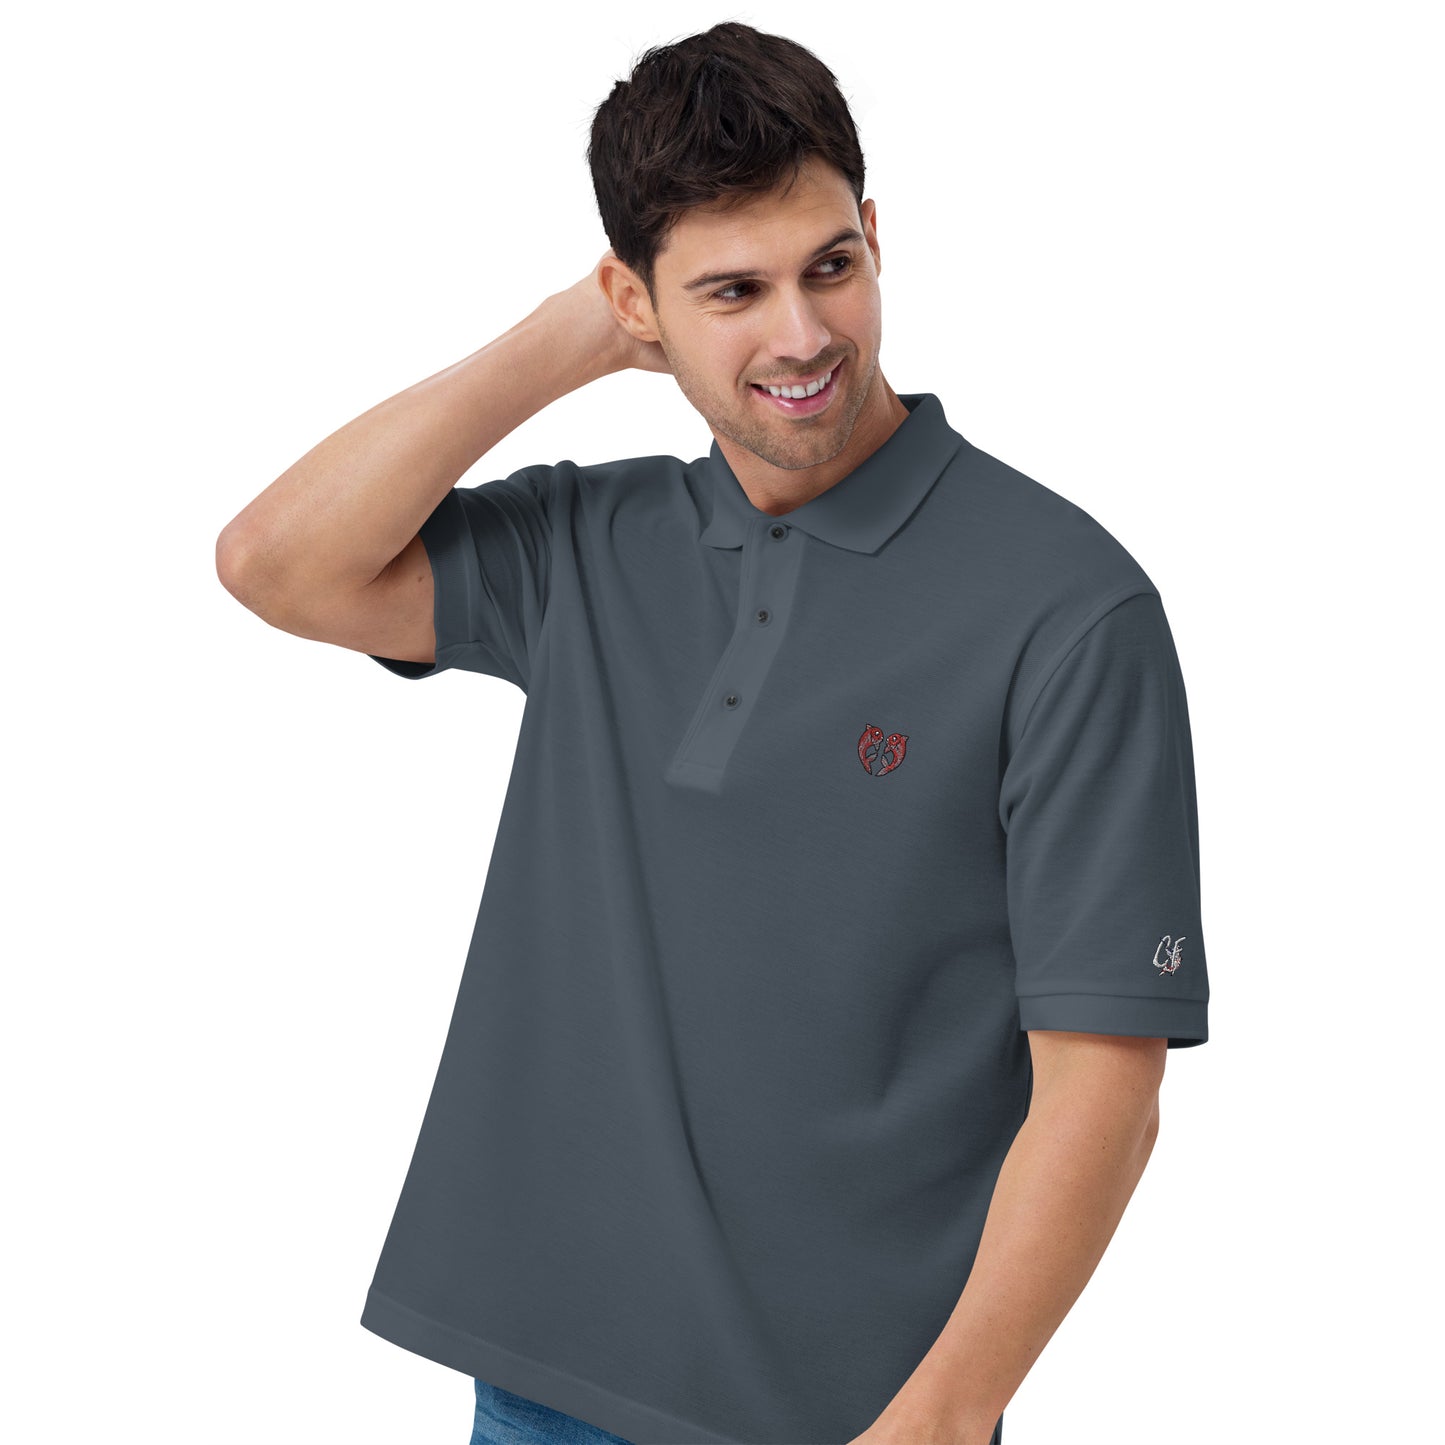 'Kissing Fish' Men's Premium Polo for Valentines Day